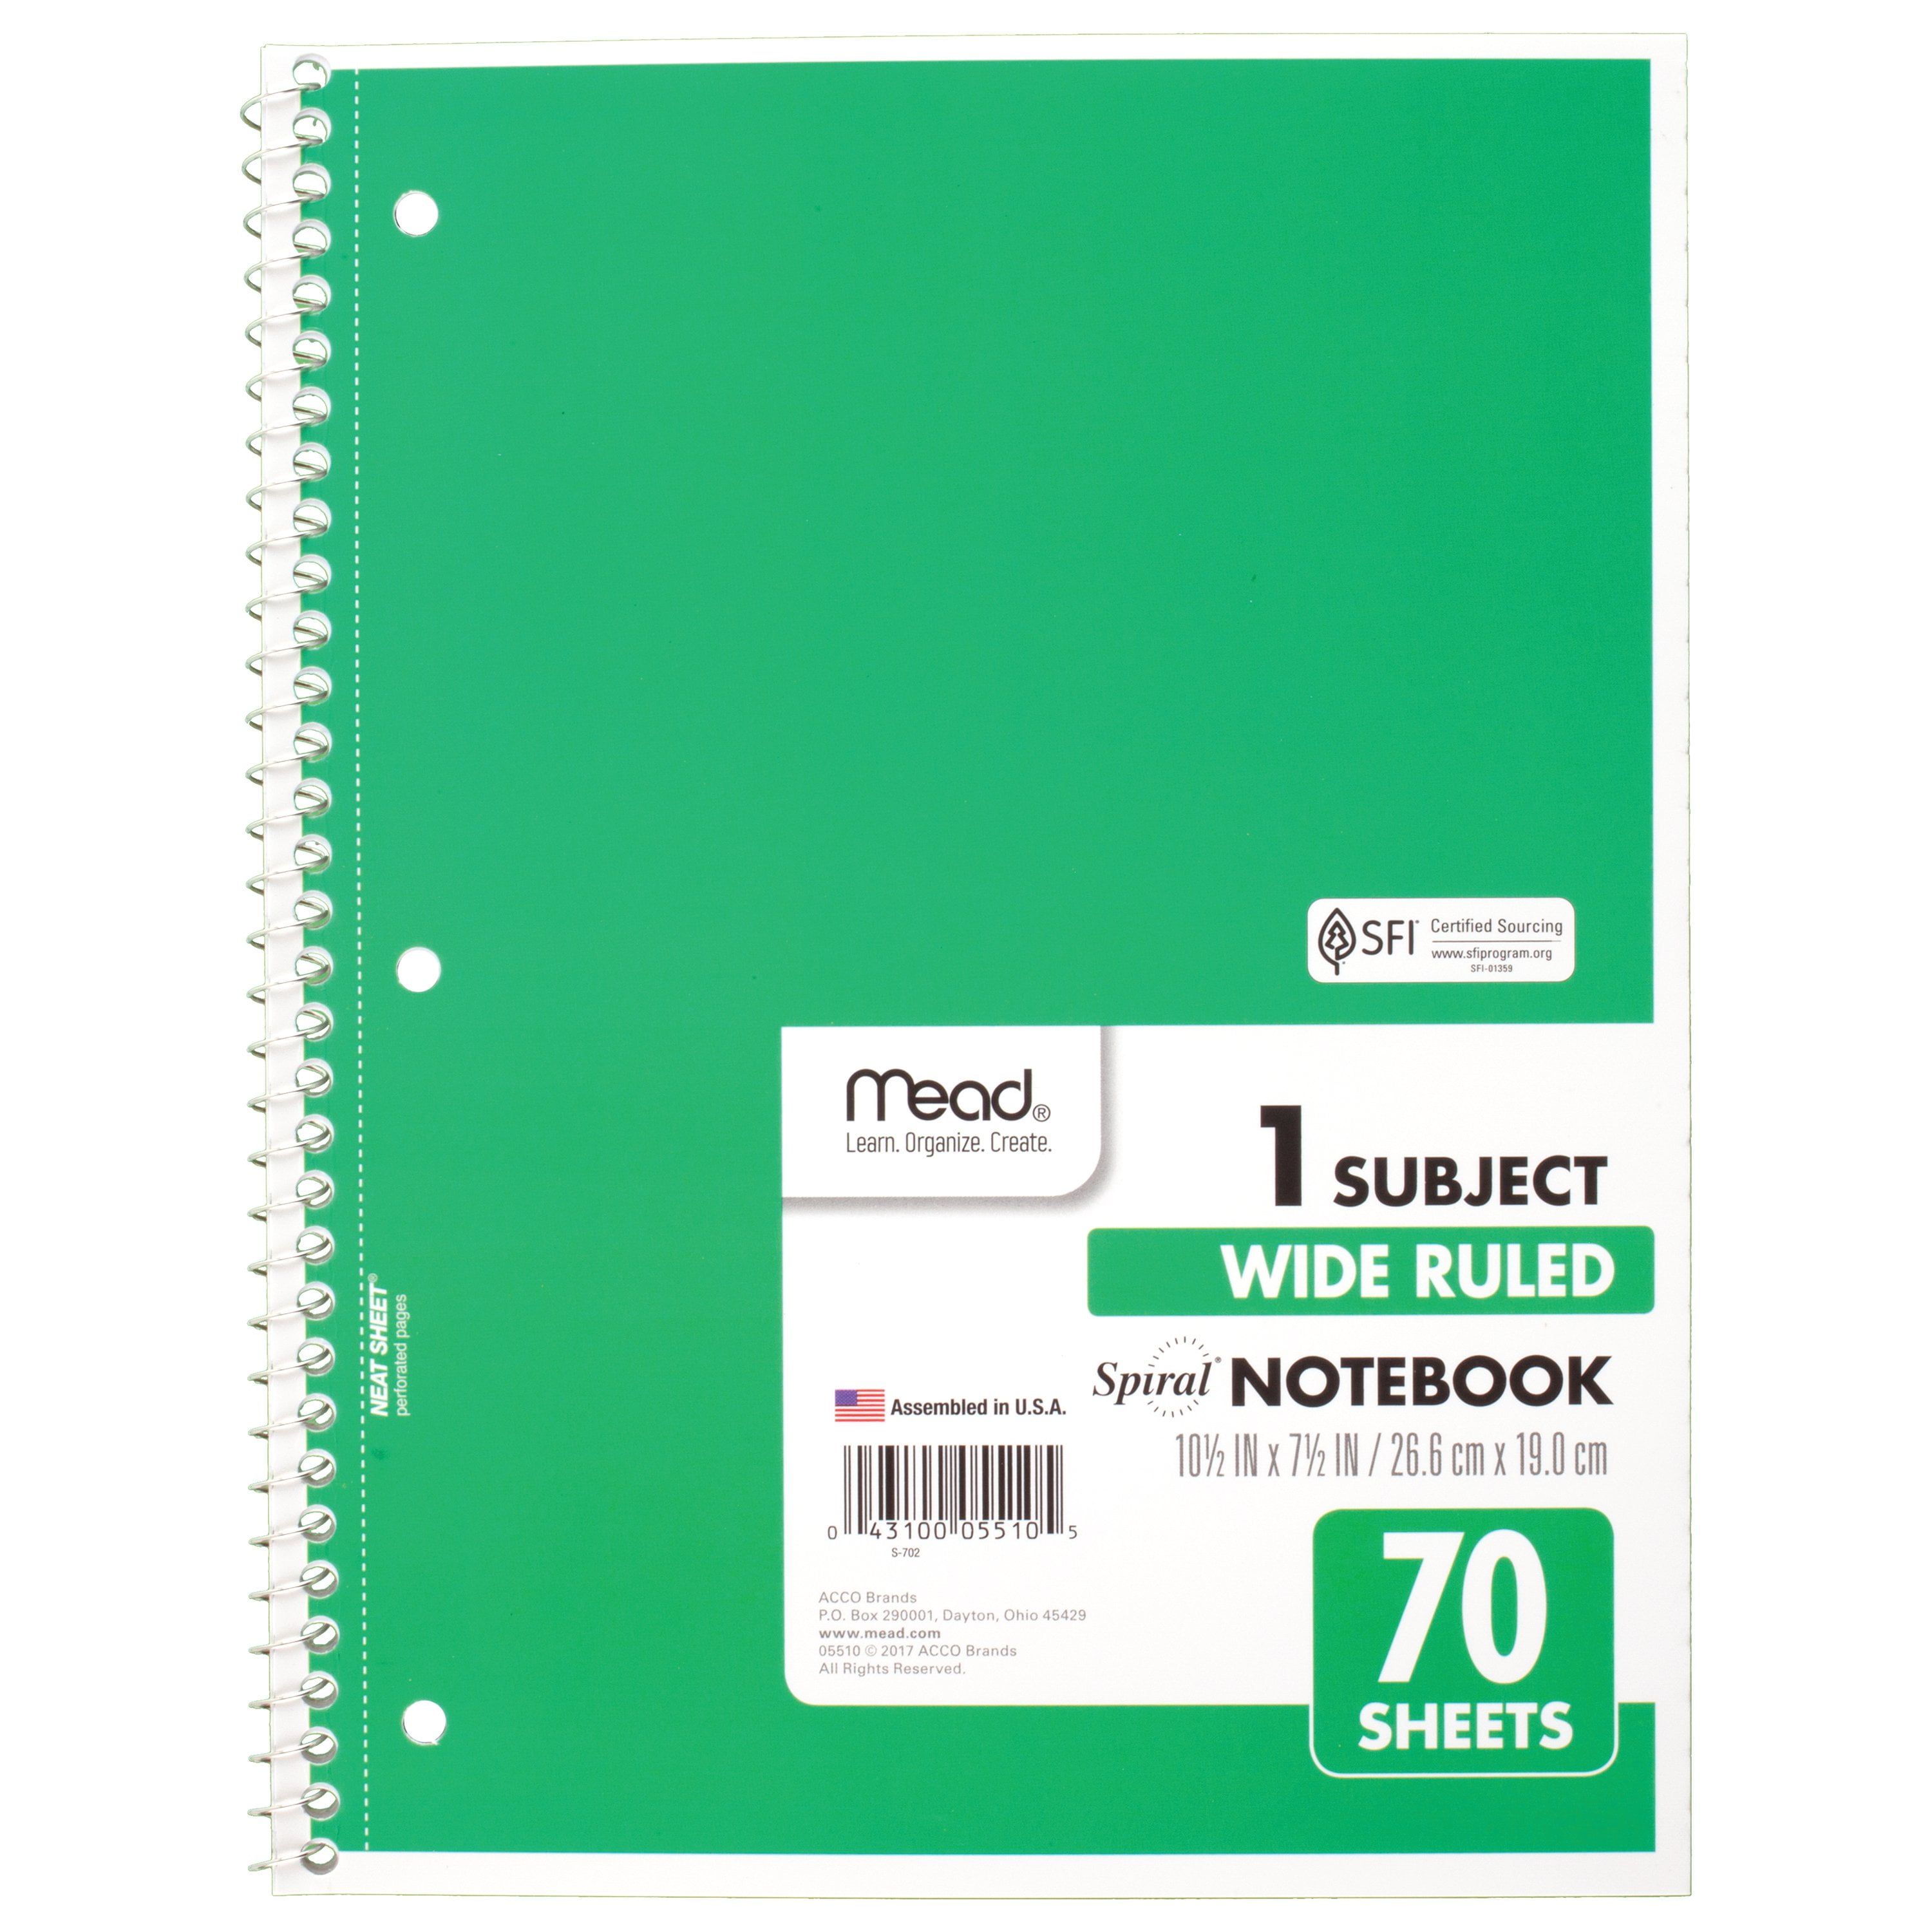 WHOLESALE SPIRAL NOTEBOOK 1 Subject 70 Sheets wide Ruled lot of 100 